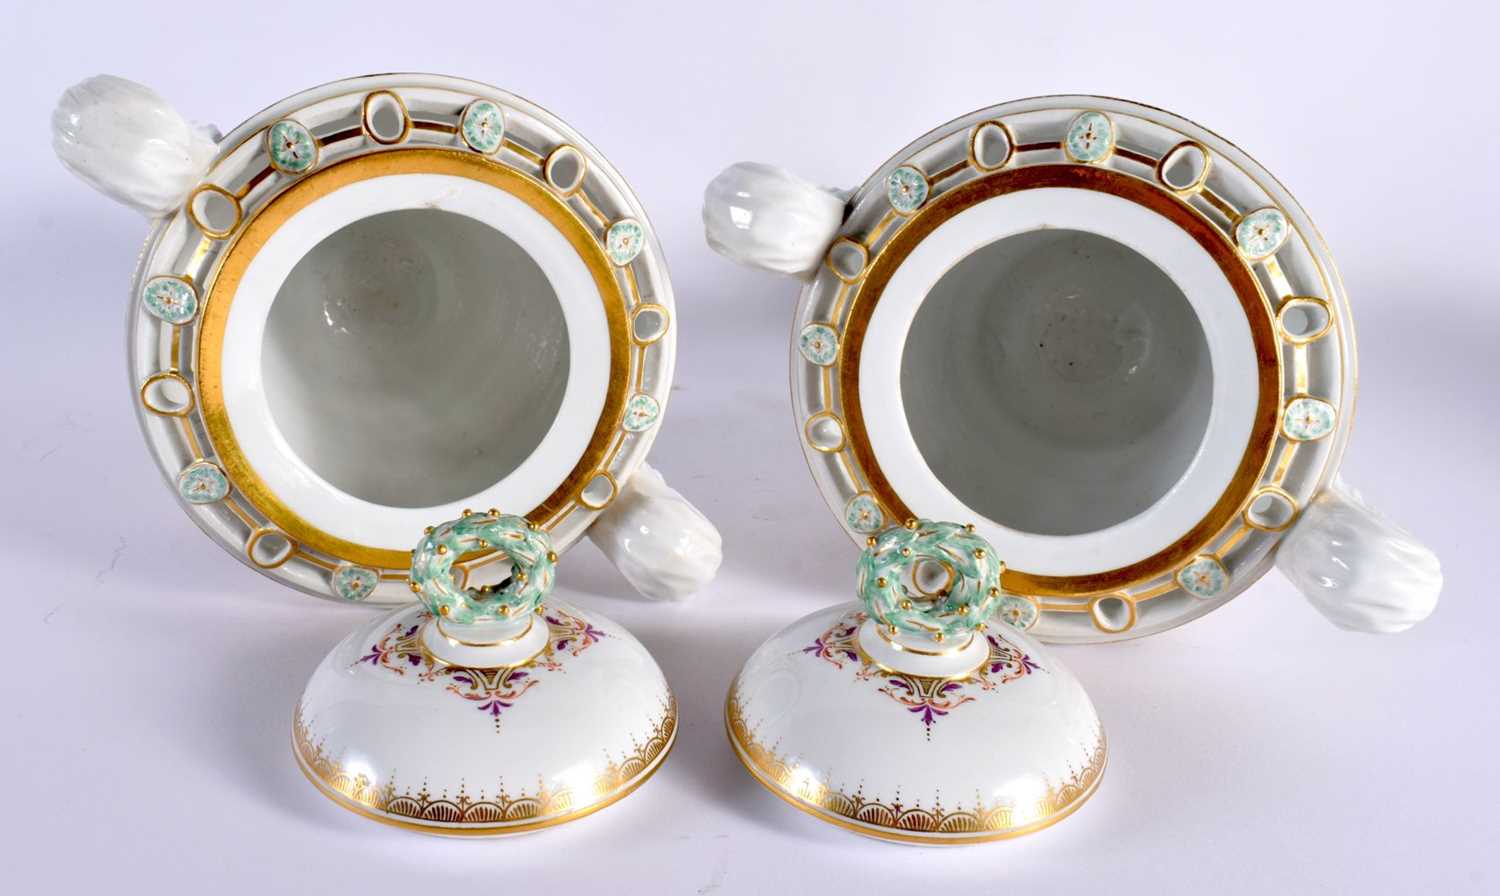 A FINE PAIR OF 19TH ENTURY MEISSEN POT-POURRI VASES AND COVERS with blue crossed swords marks, - Image 7 of 18